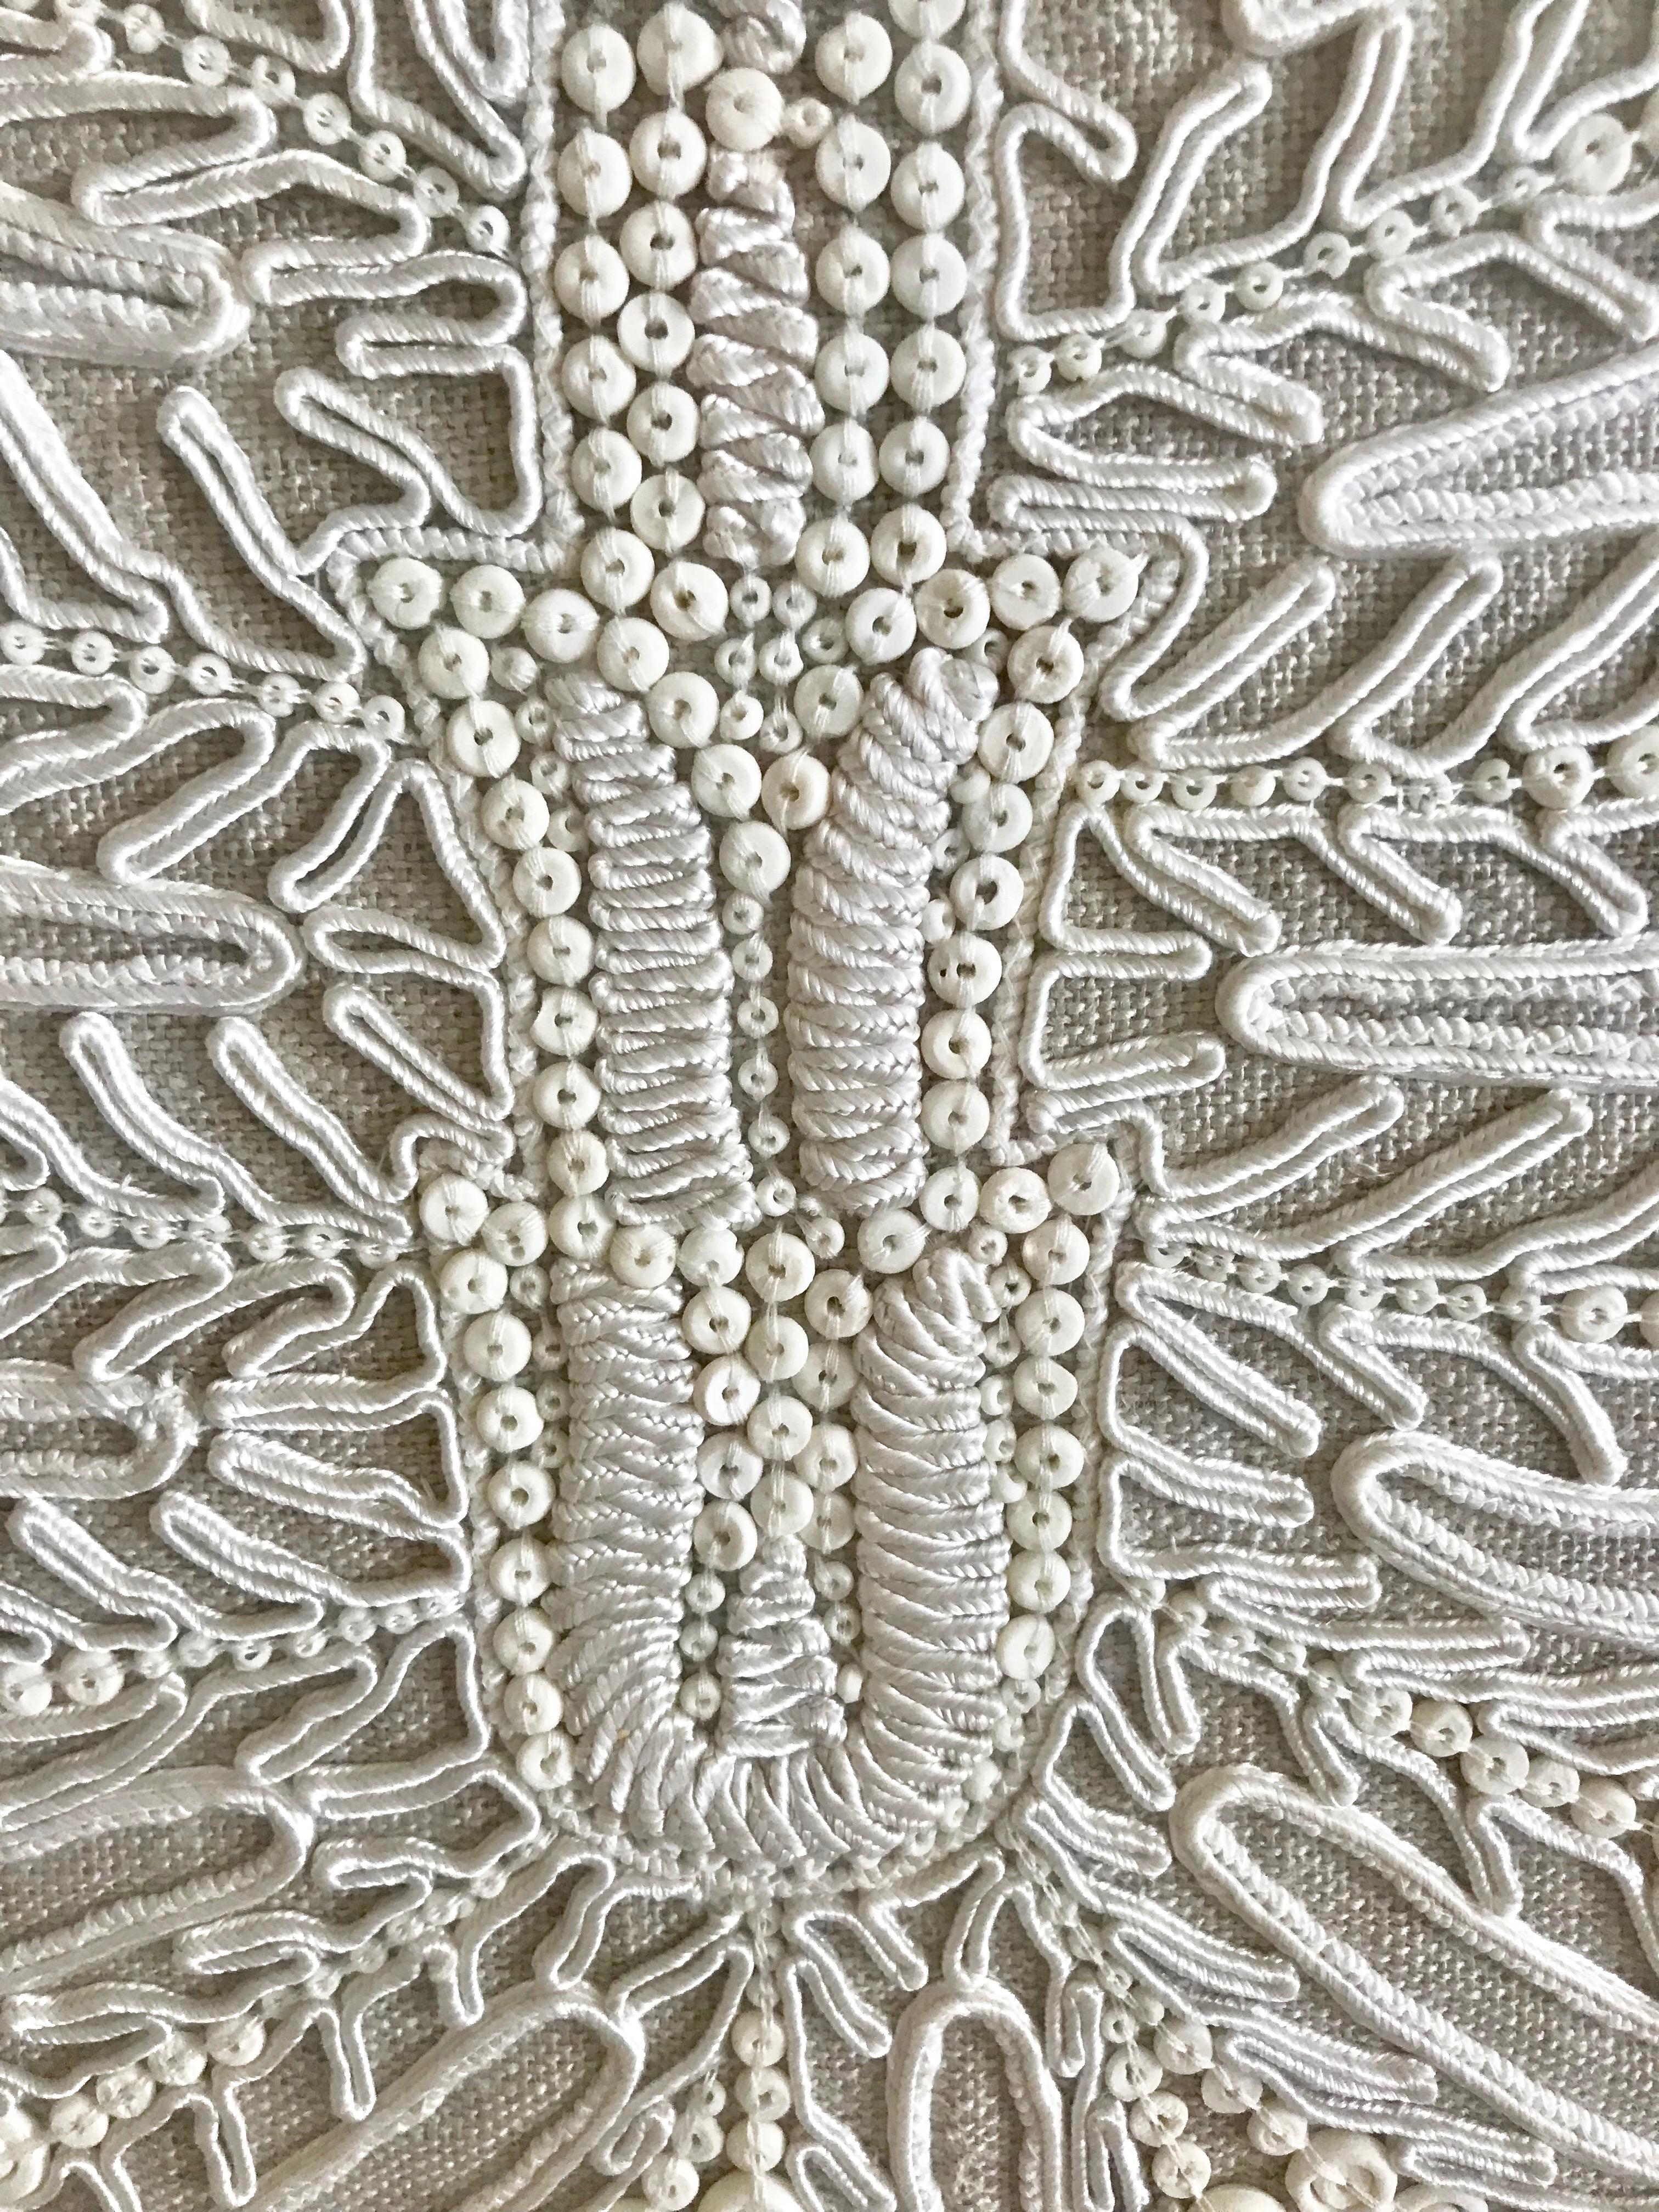 Beautiful large framed embroidery having white heavy yarn in an abstract intricate design against taupe muslin, matted and framed in white.